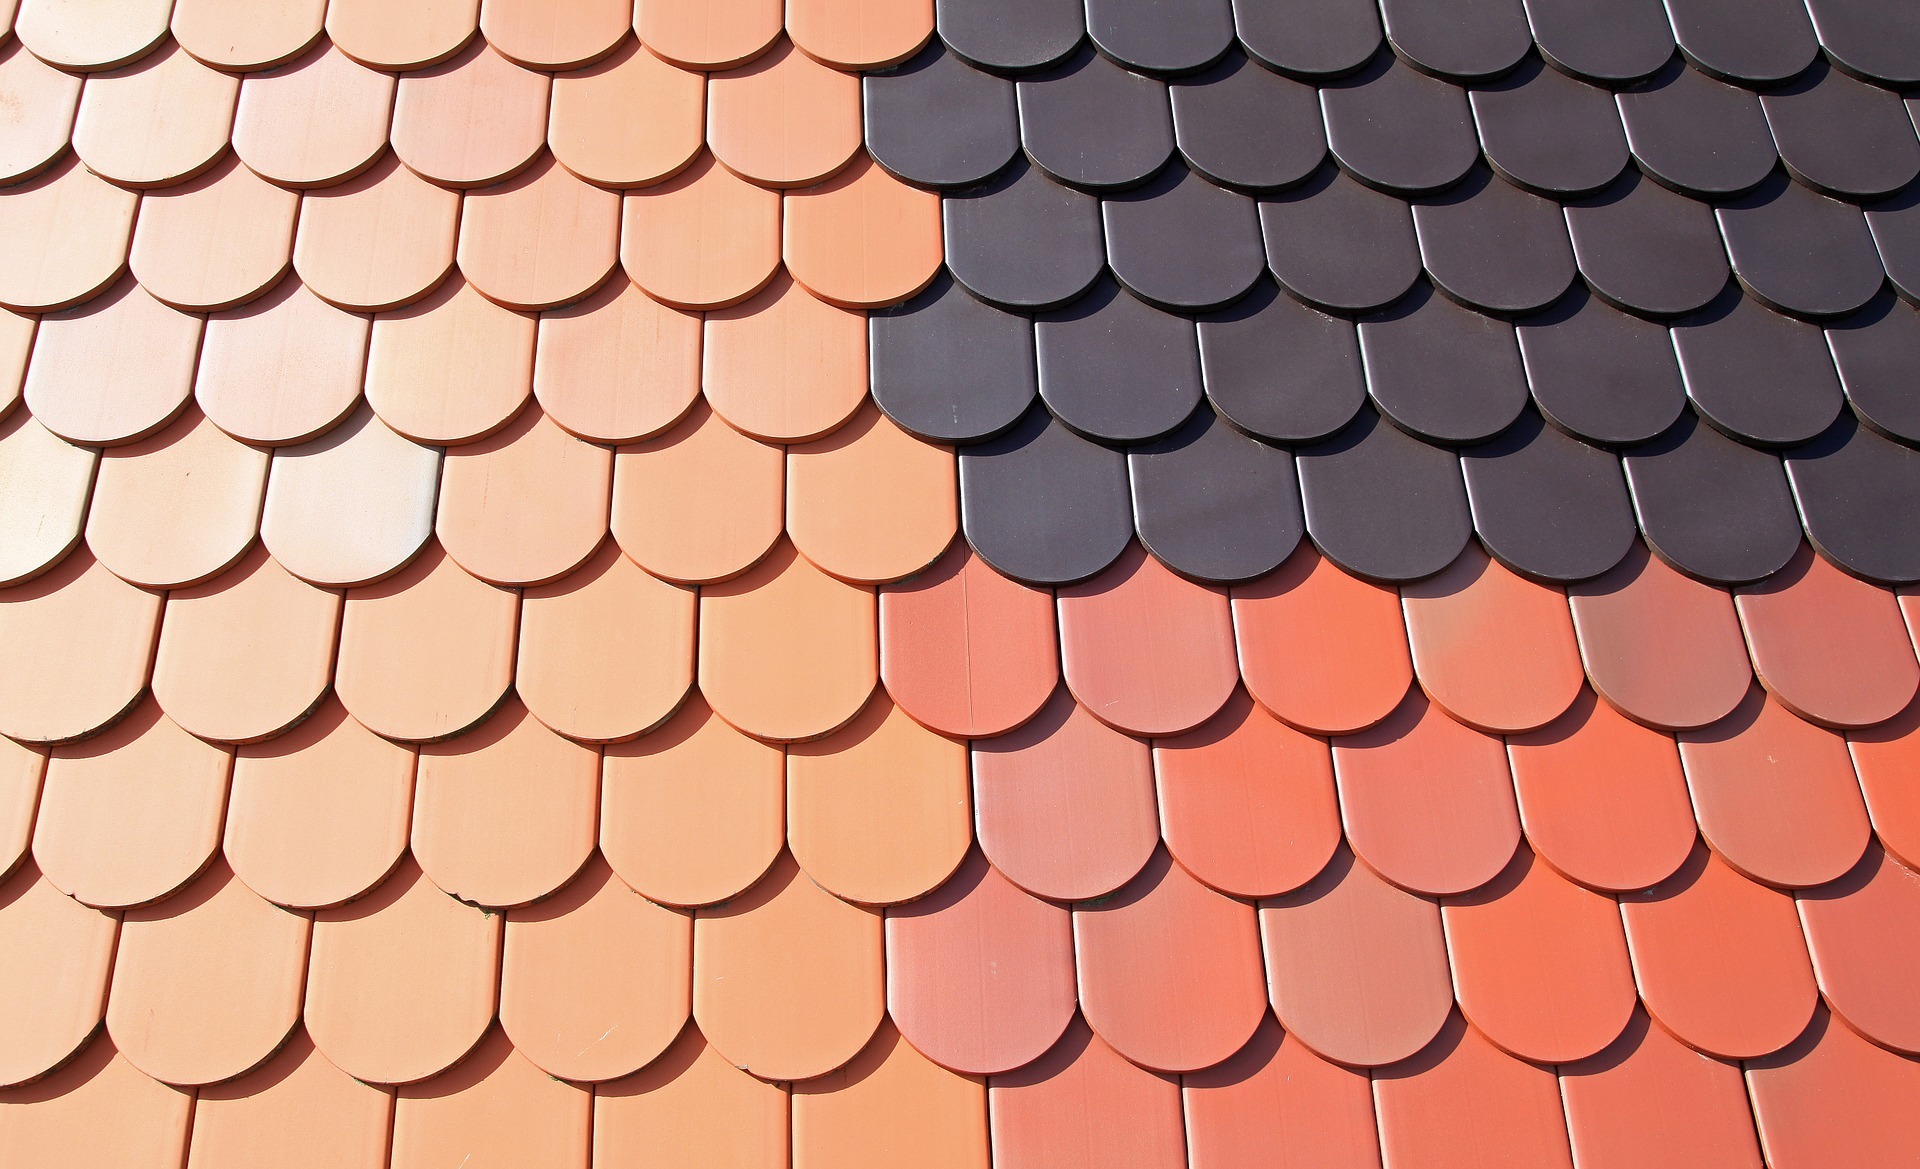 Choosing the Right Roofing Material for Your New Garage